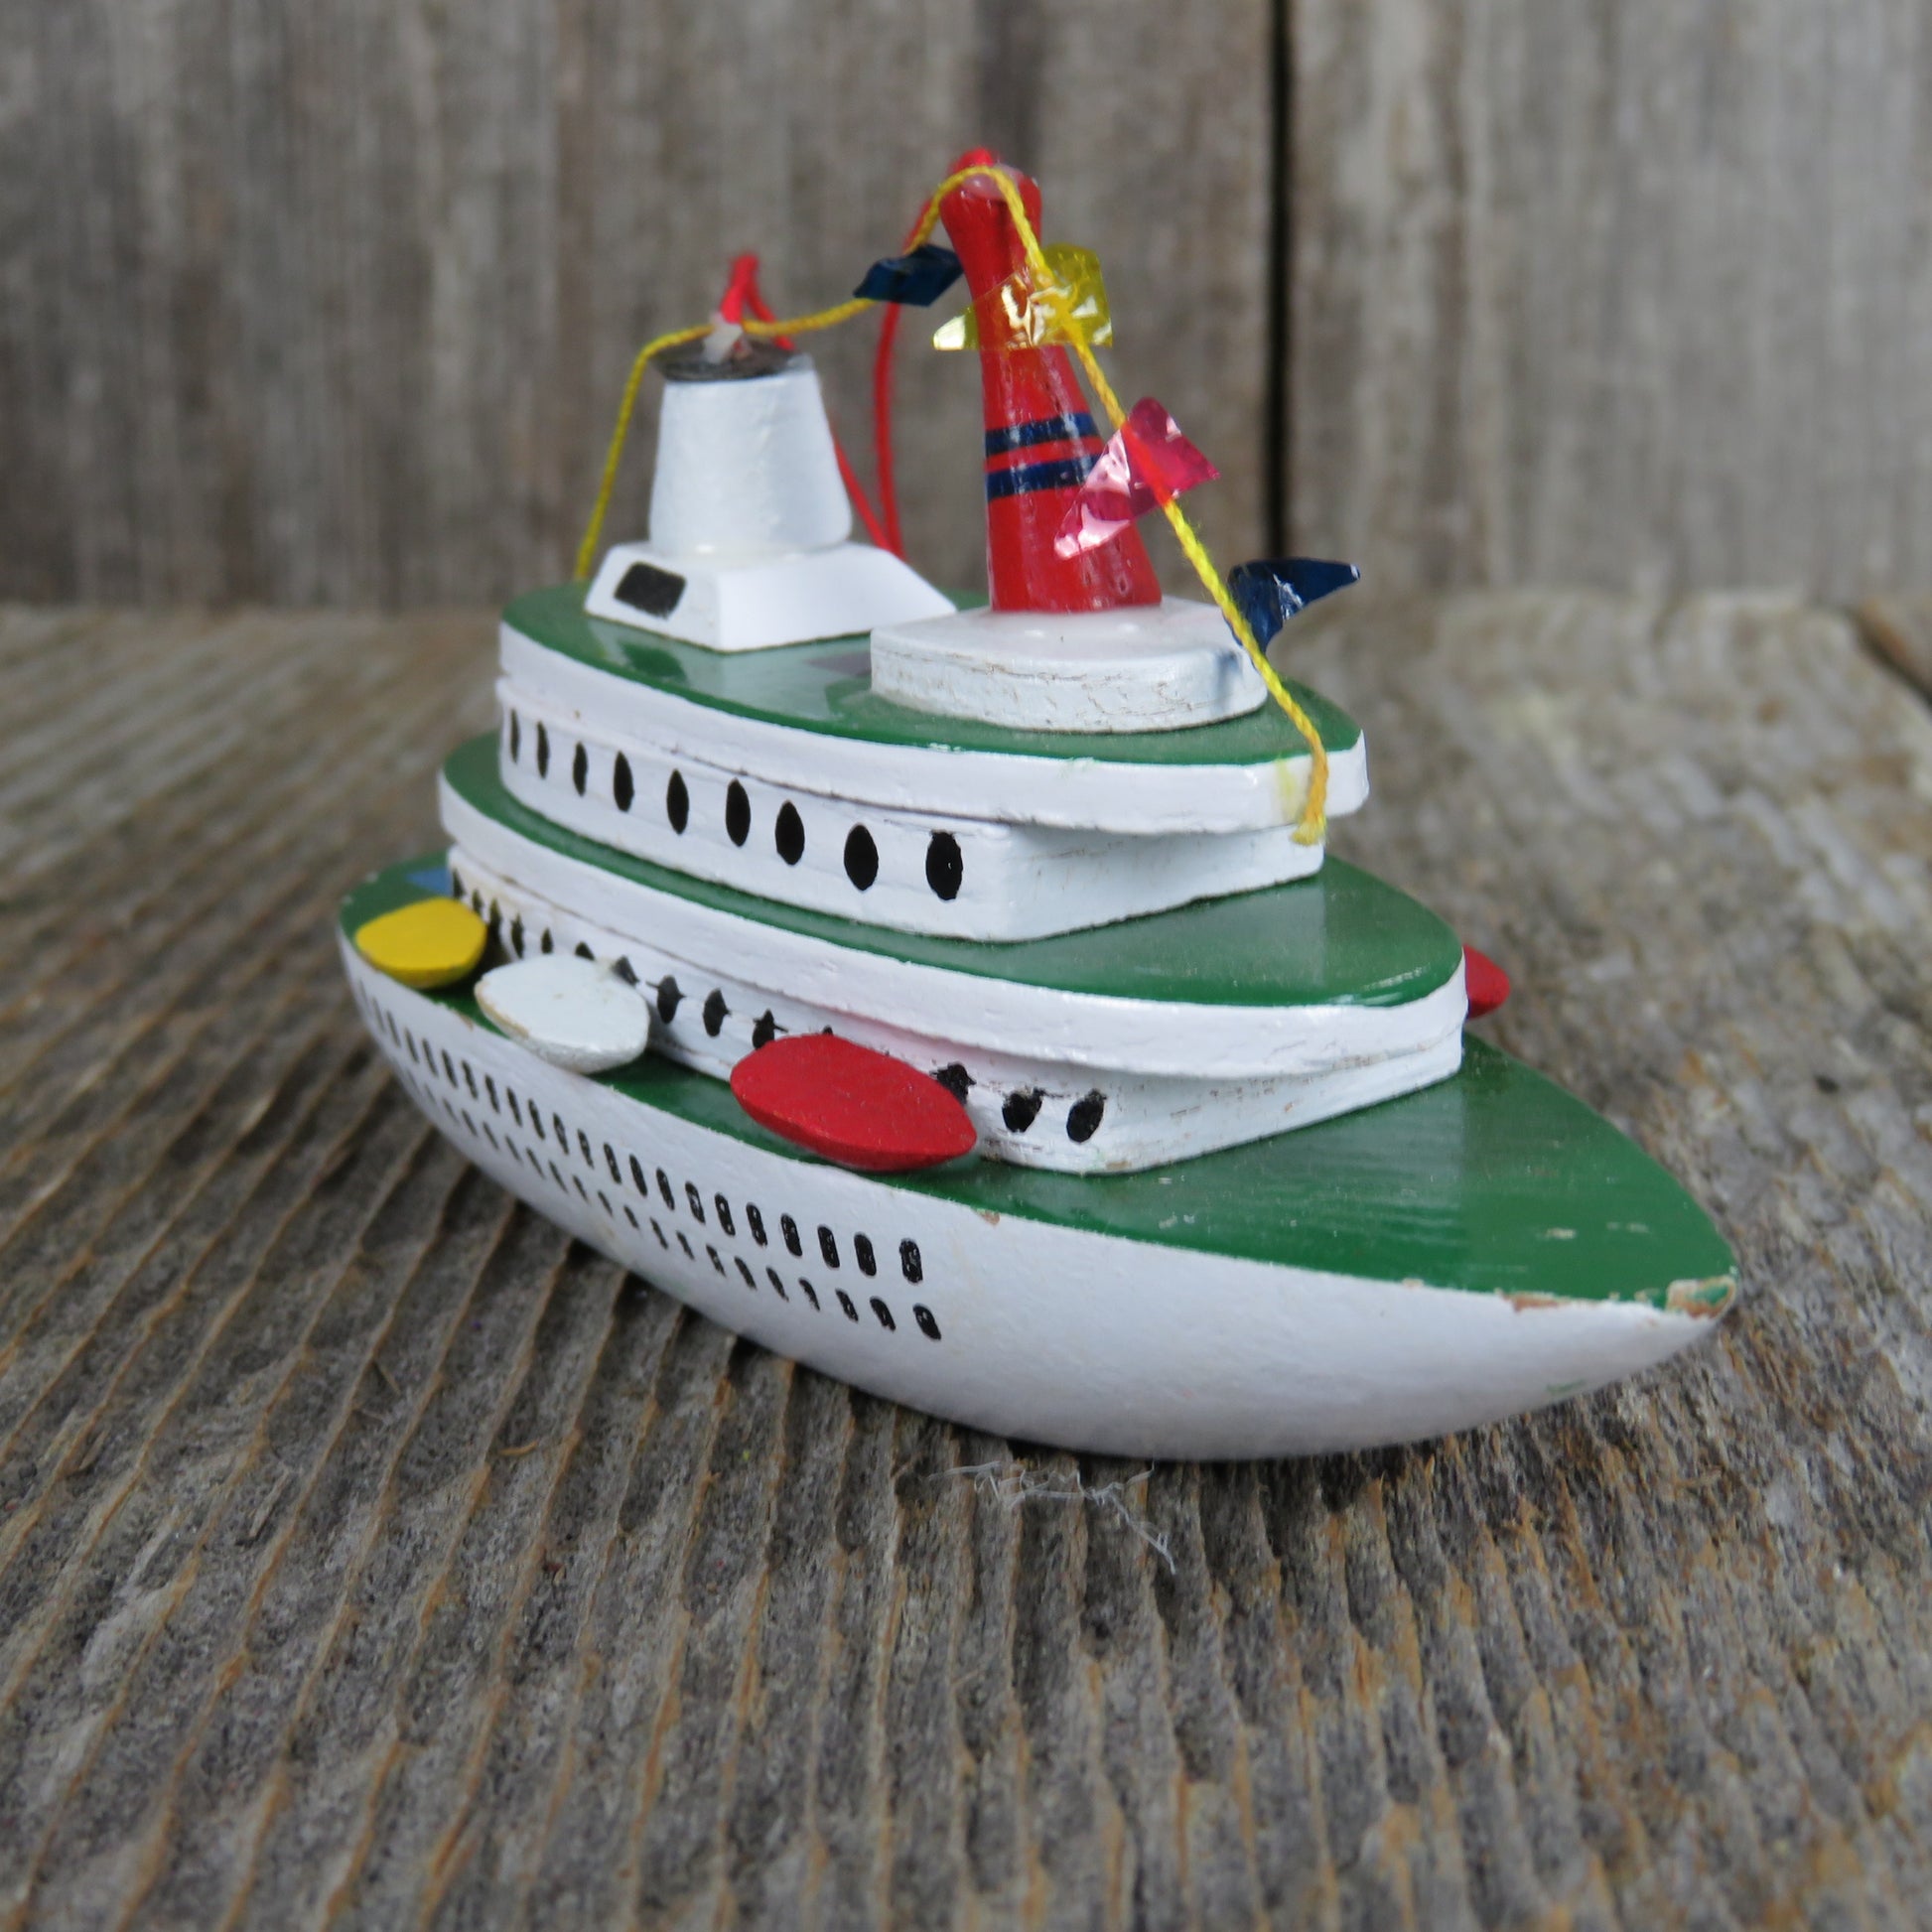 Vintage Cruise Ship Yacht Wood Ornament Wooden Boat Midwest Importers Christmas Cannon Falls Taiwan - At Grandma's Table